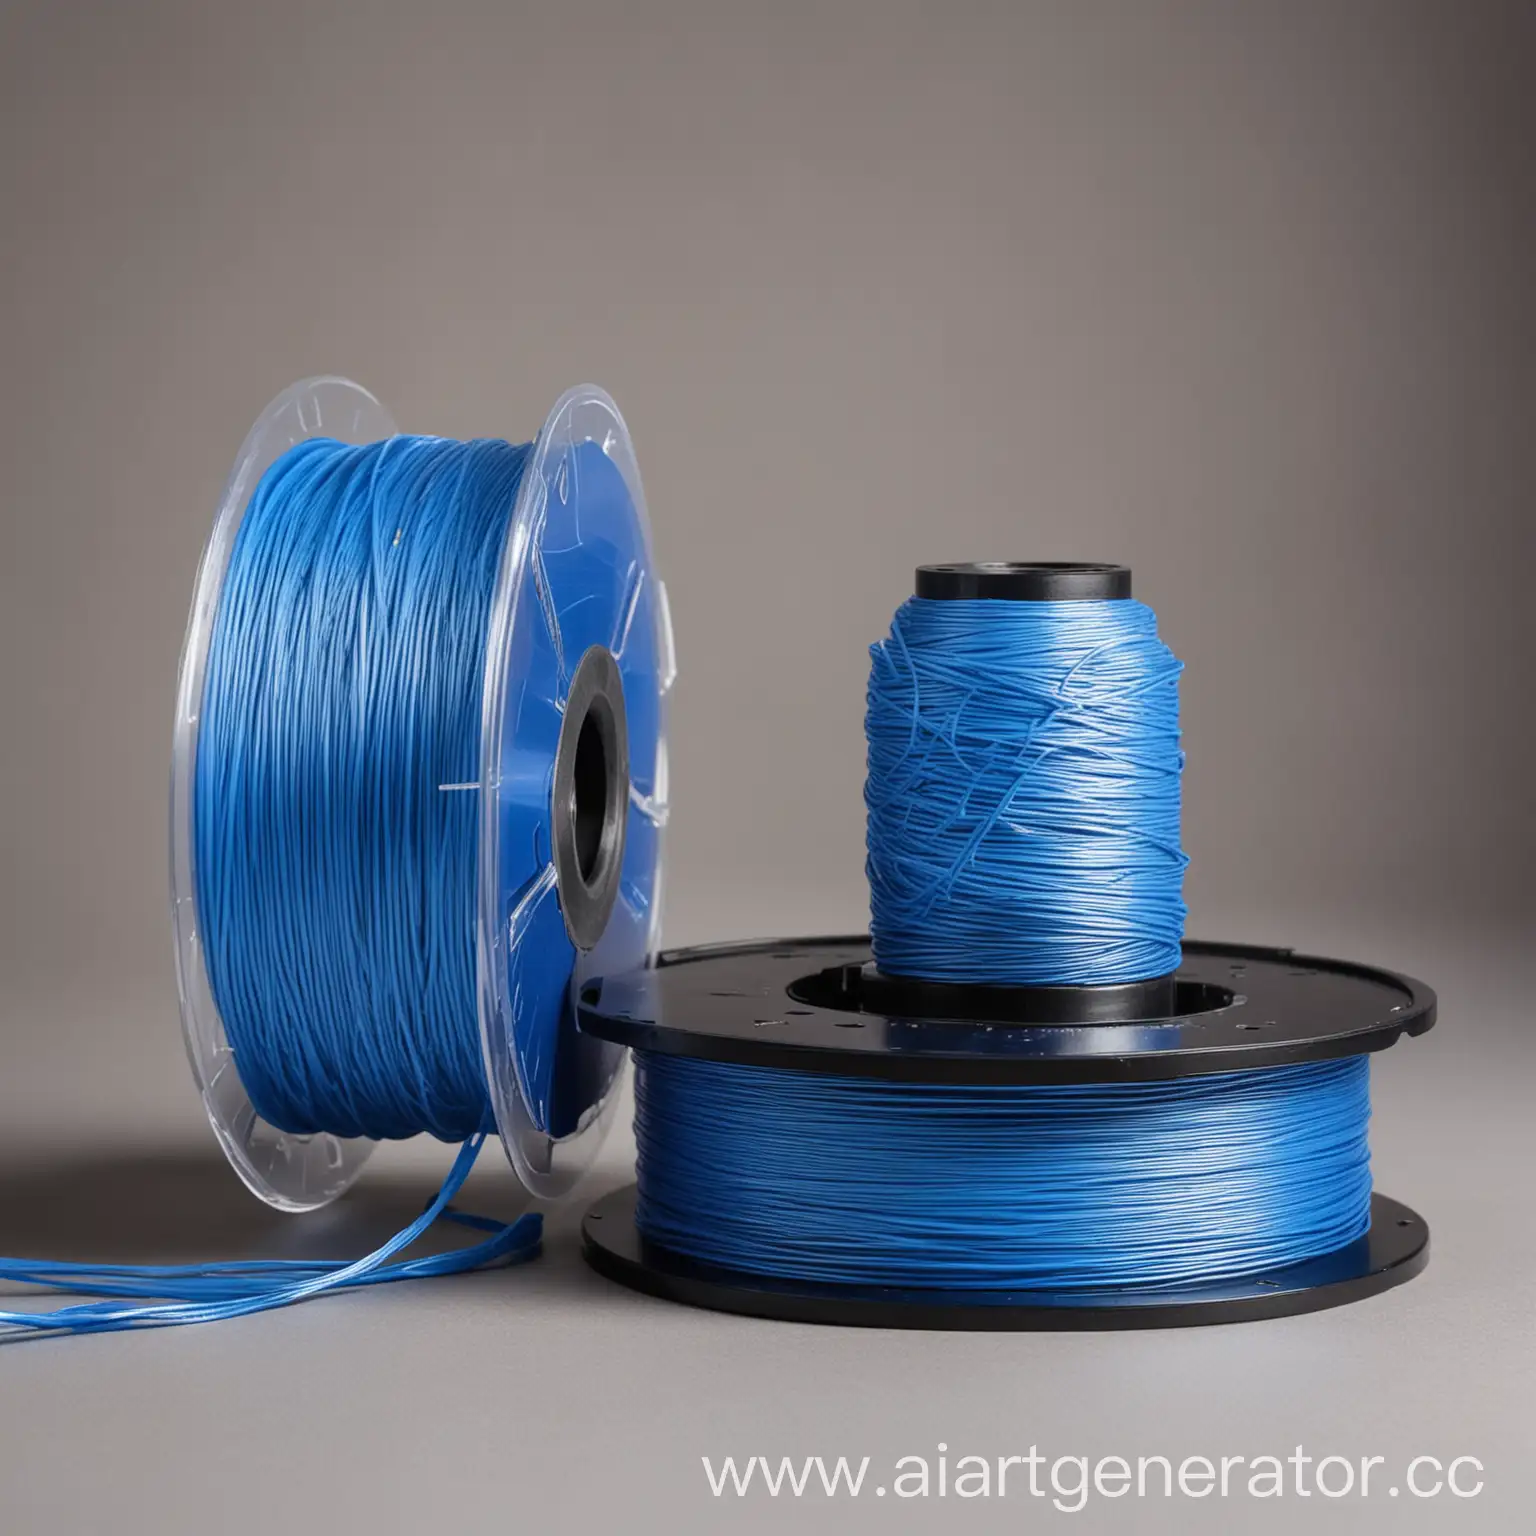 3D-Printer-with-Silk-Blue-PLA-Plastic-Spool-Modern-Technology-in-Action